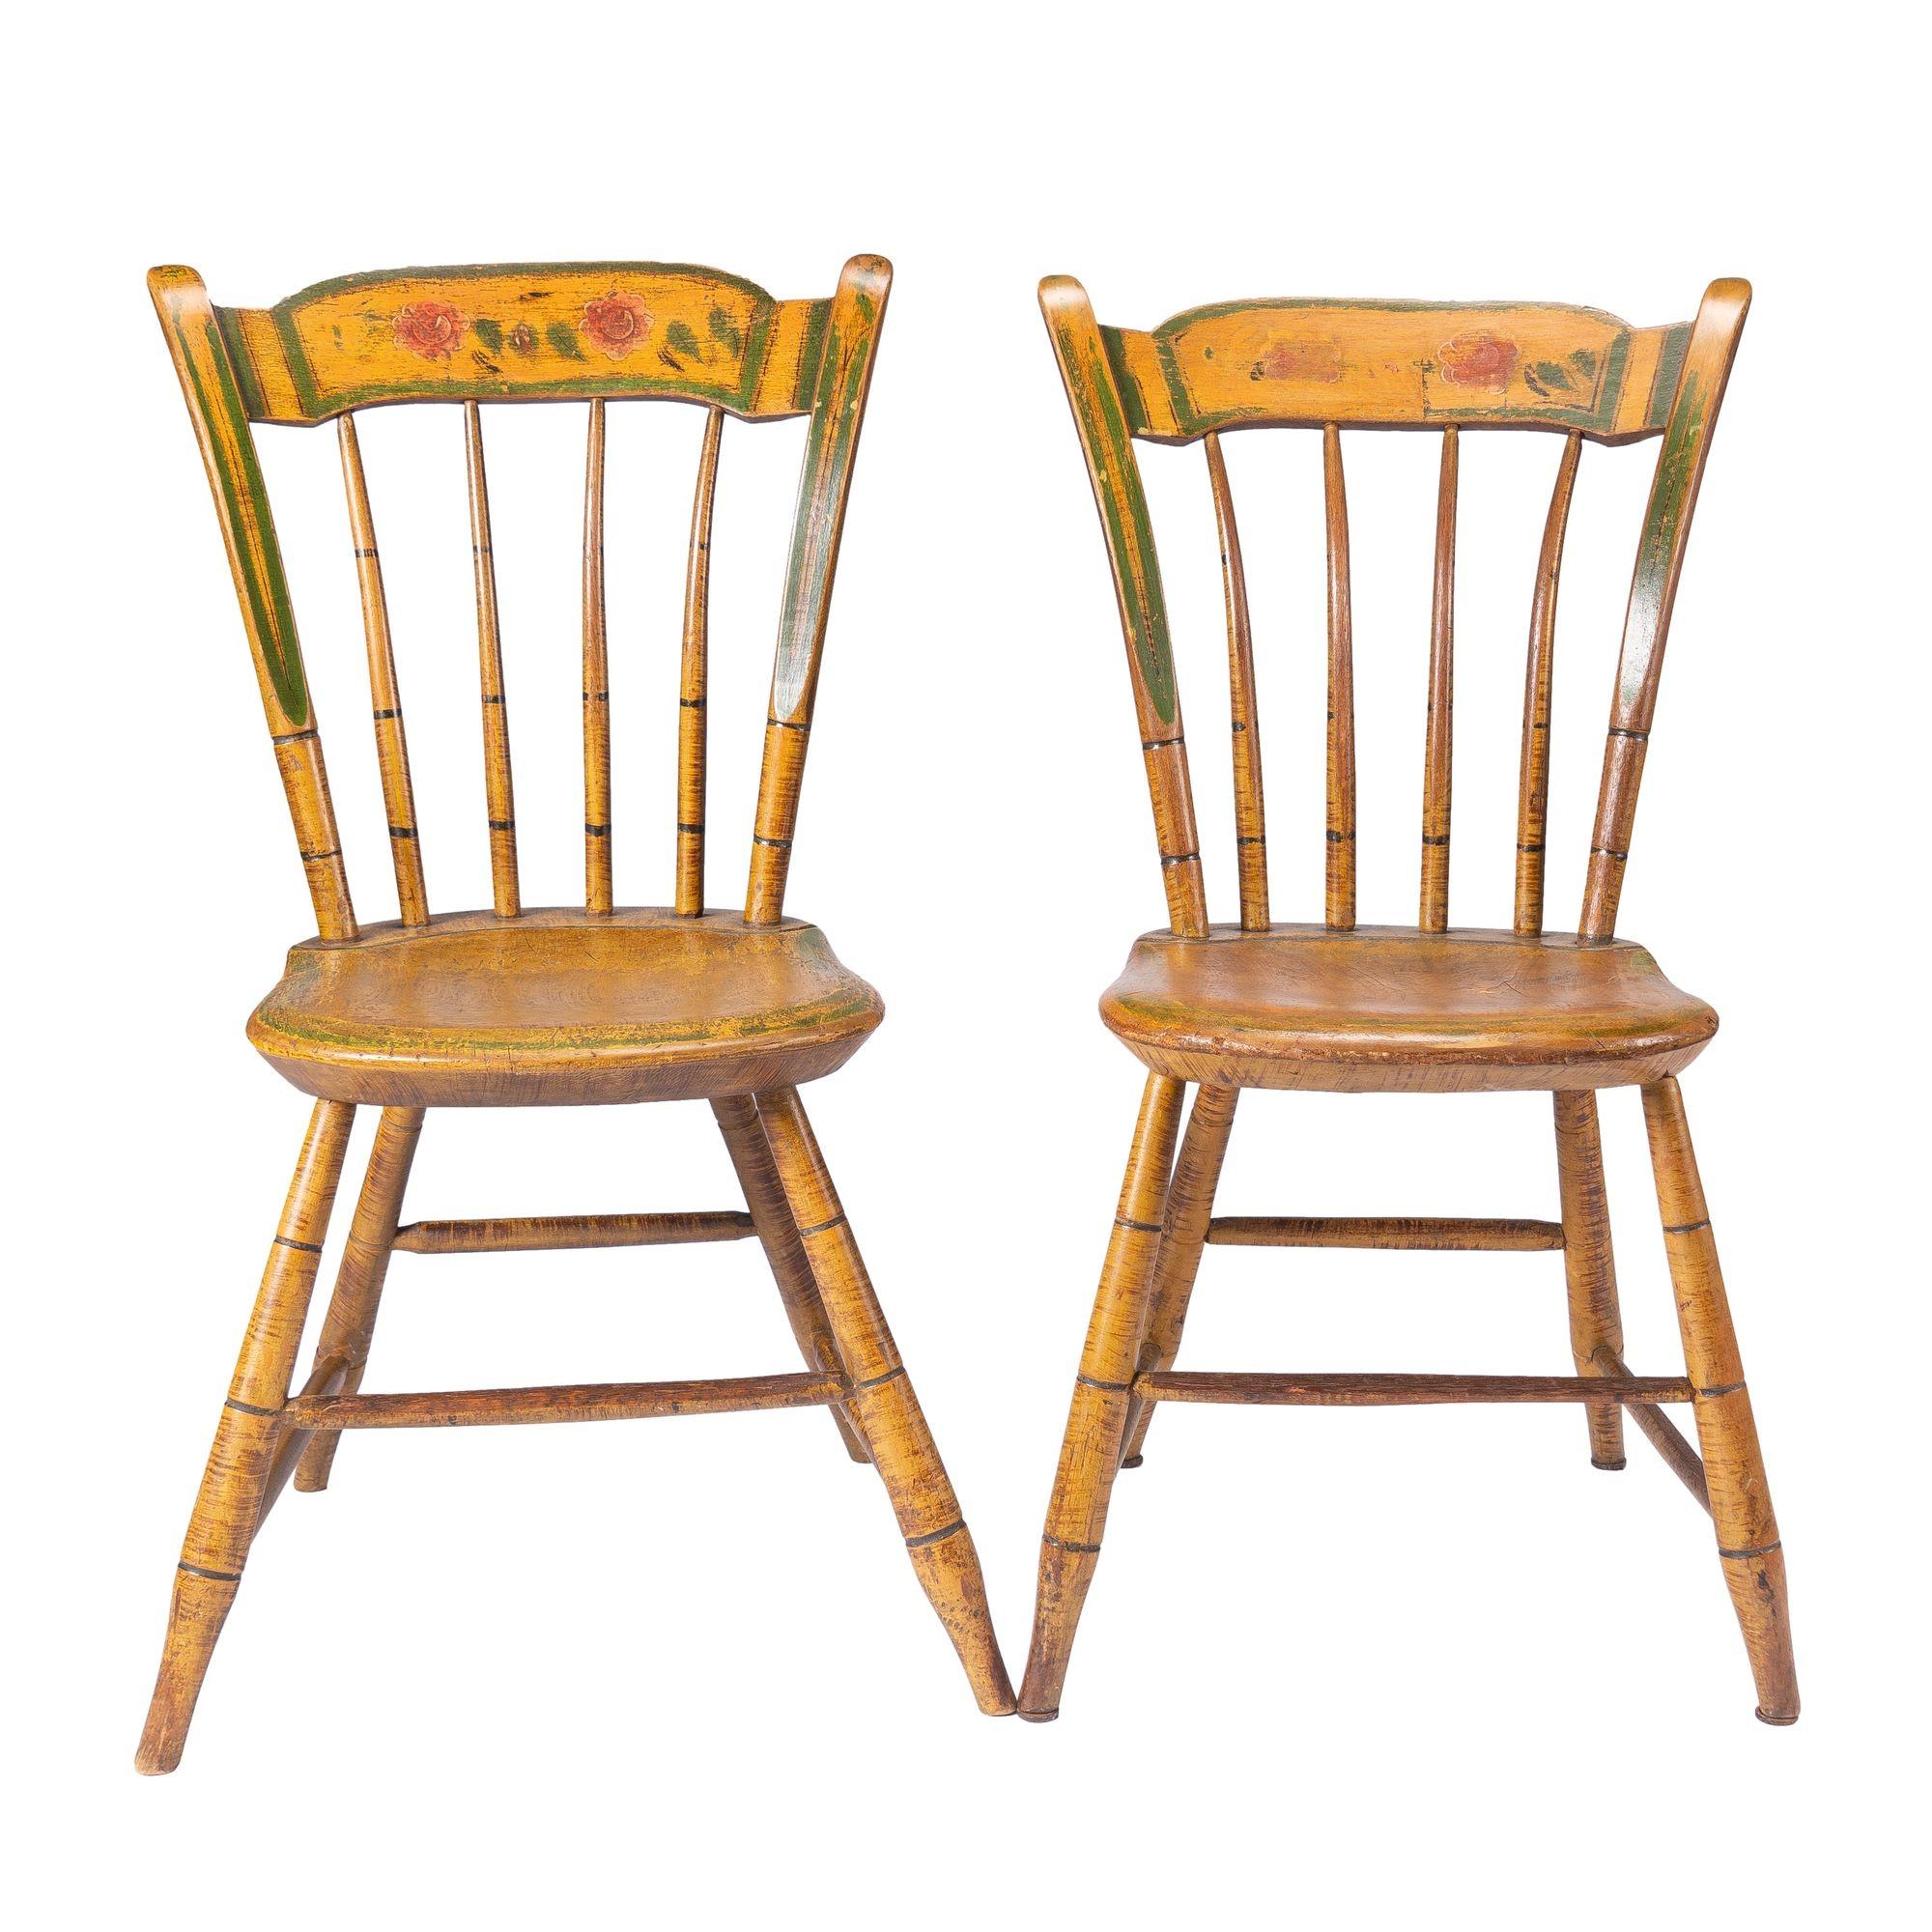 American Pair of New England Painted Windsor Side Chairs, 1830-40 For Sale